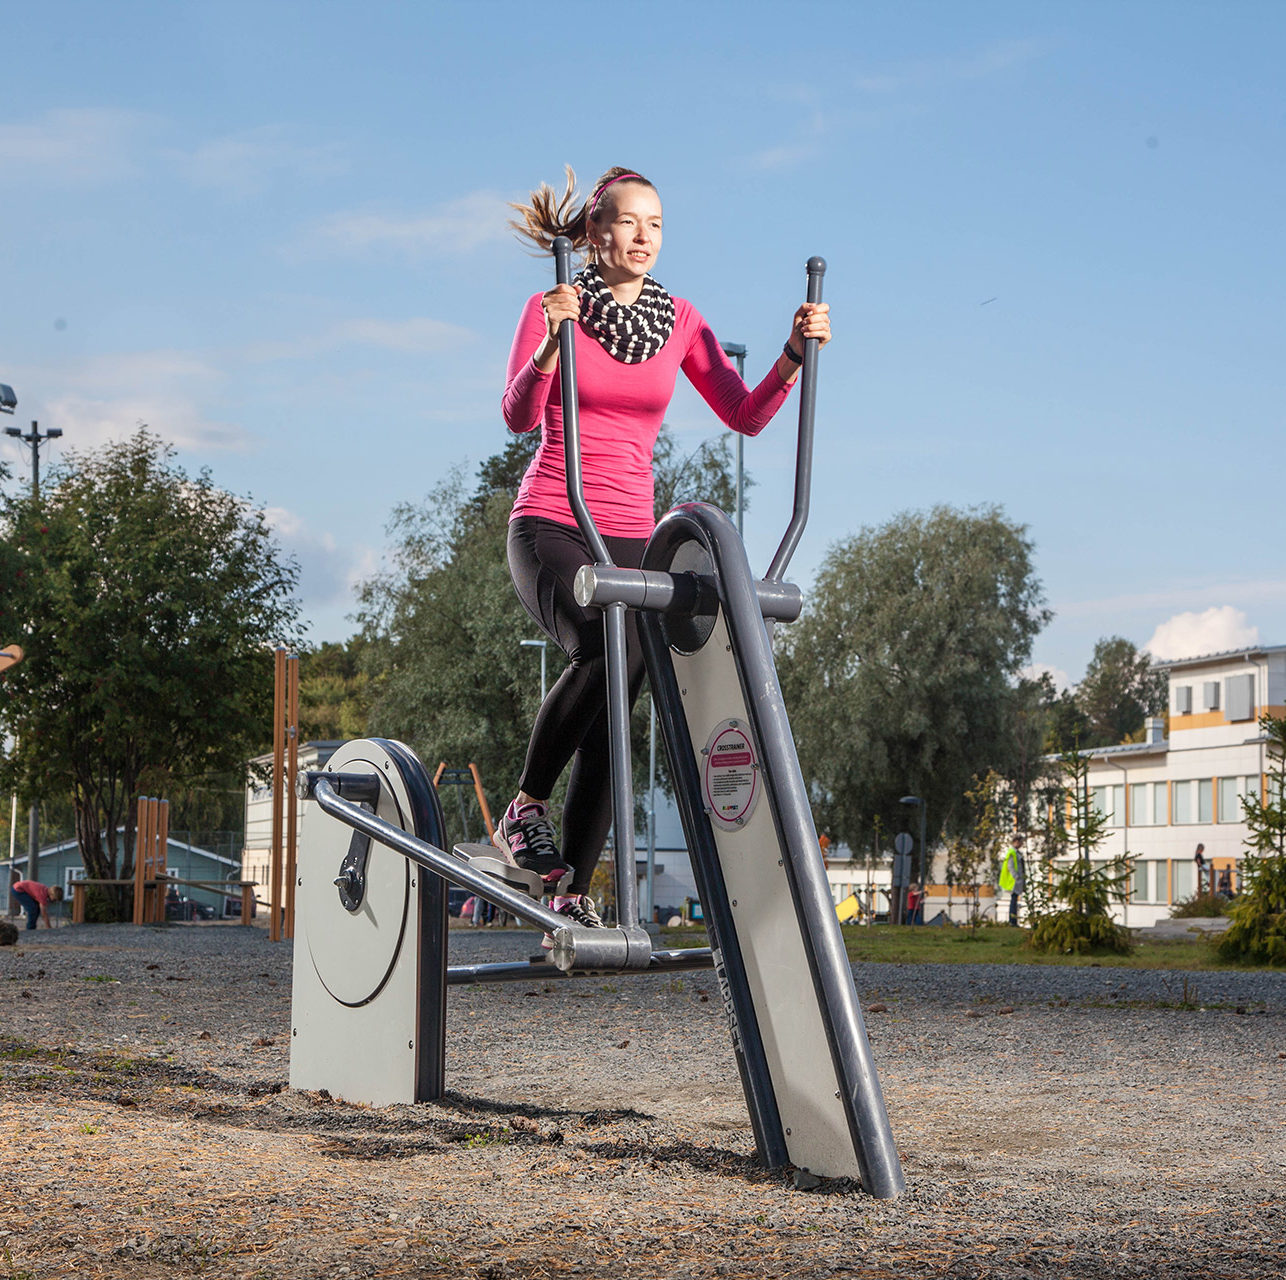 outdoor gym cross trainer being used by lady